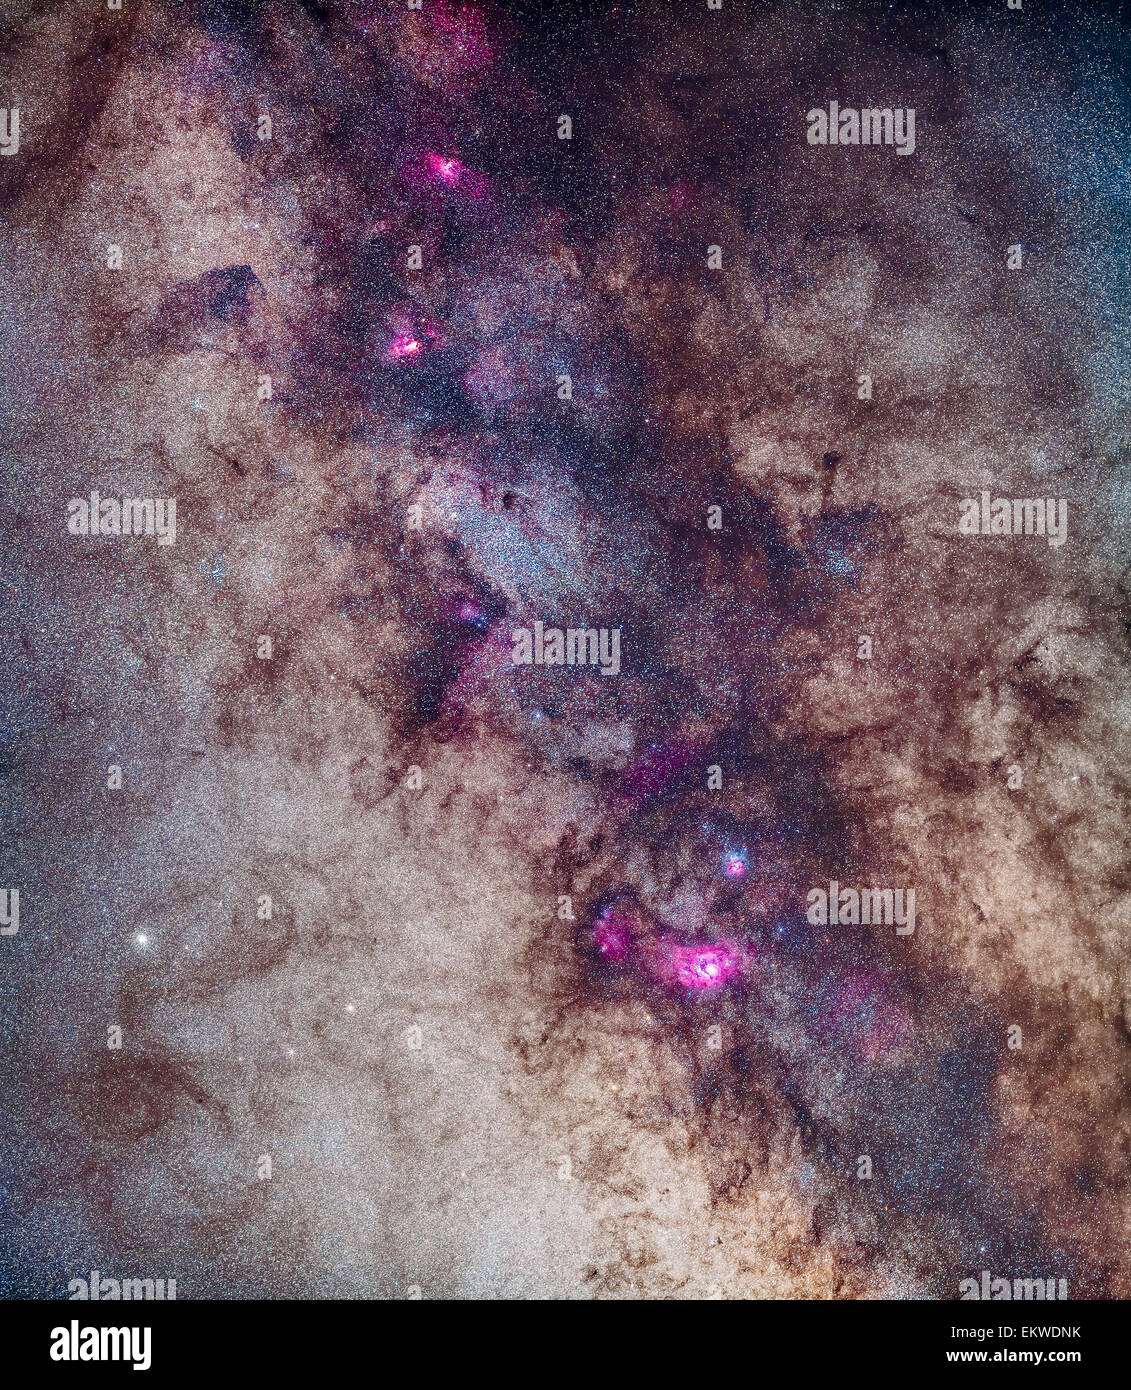 A mosaic of the Milky Way around the Small Sagittarius Star Cloud (M24). The view takes in the Milky Way from the Lagoon Nebula Stock Photo